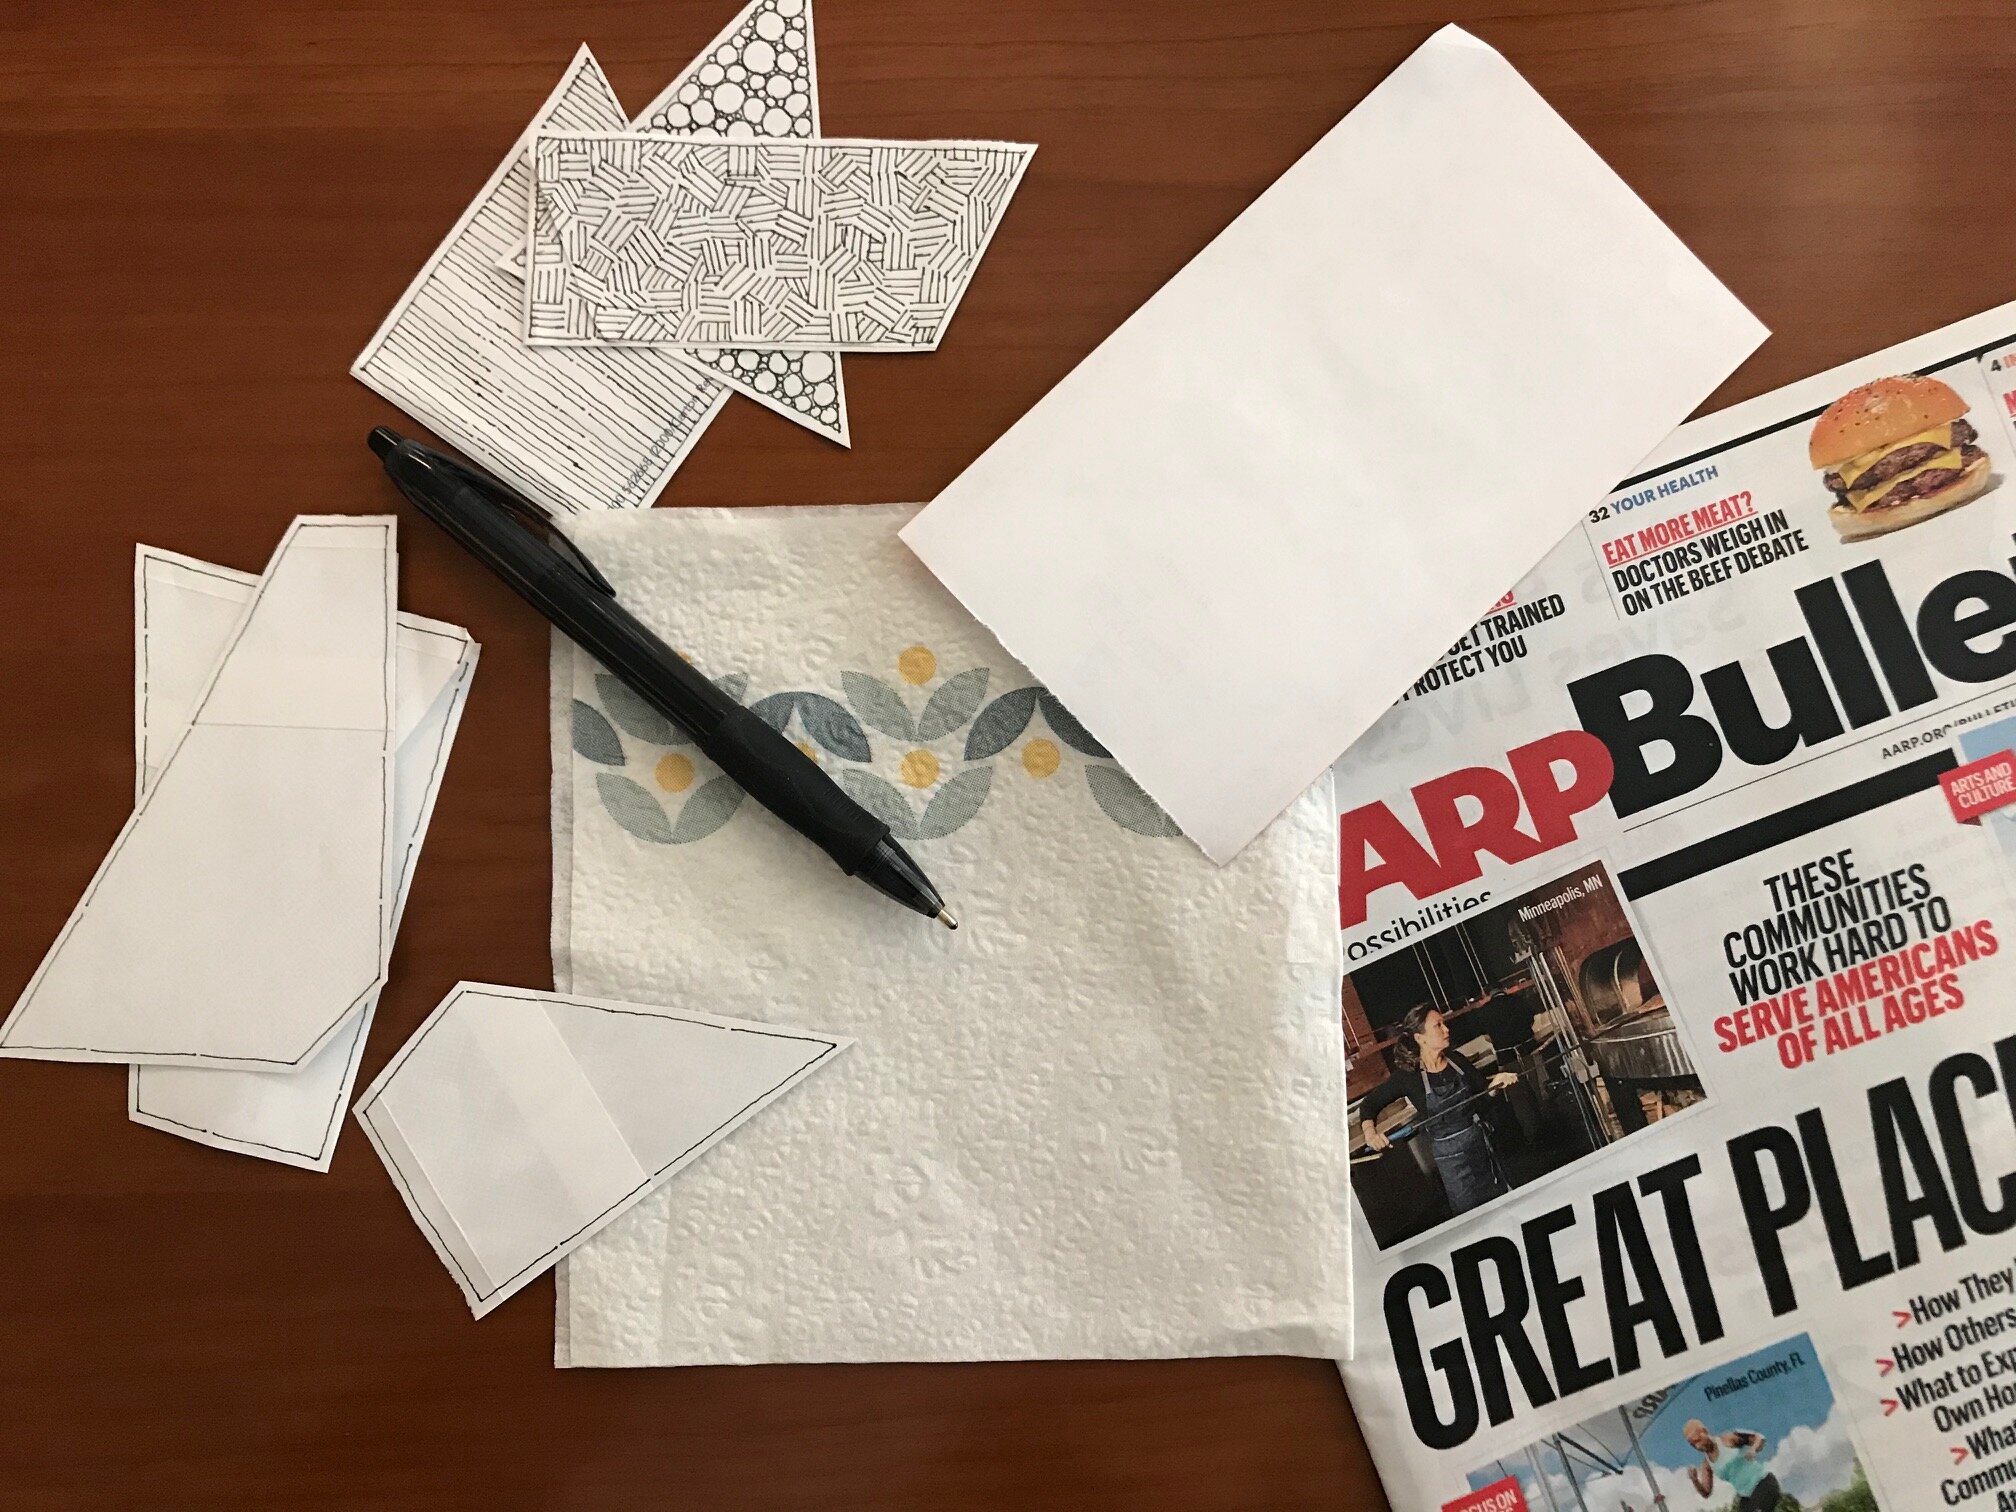  Grab another section (if you’ve run out grab another prepared envelope). Today we’ll also be using a ballpoint pen, napkin or paper towel, magazine or newspaper, and scrap paper. And yes, someone in the household is a Senior Citizen : ) 